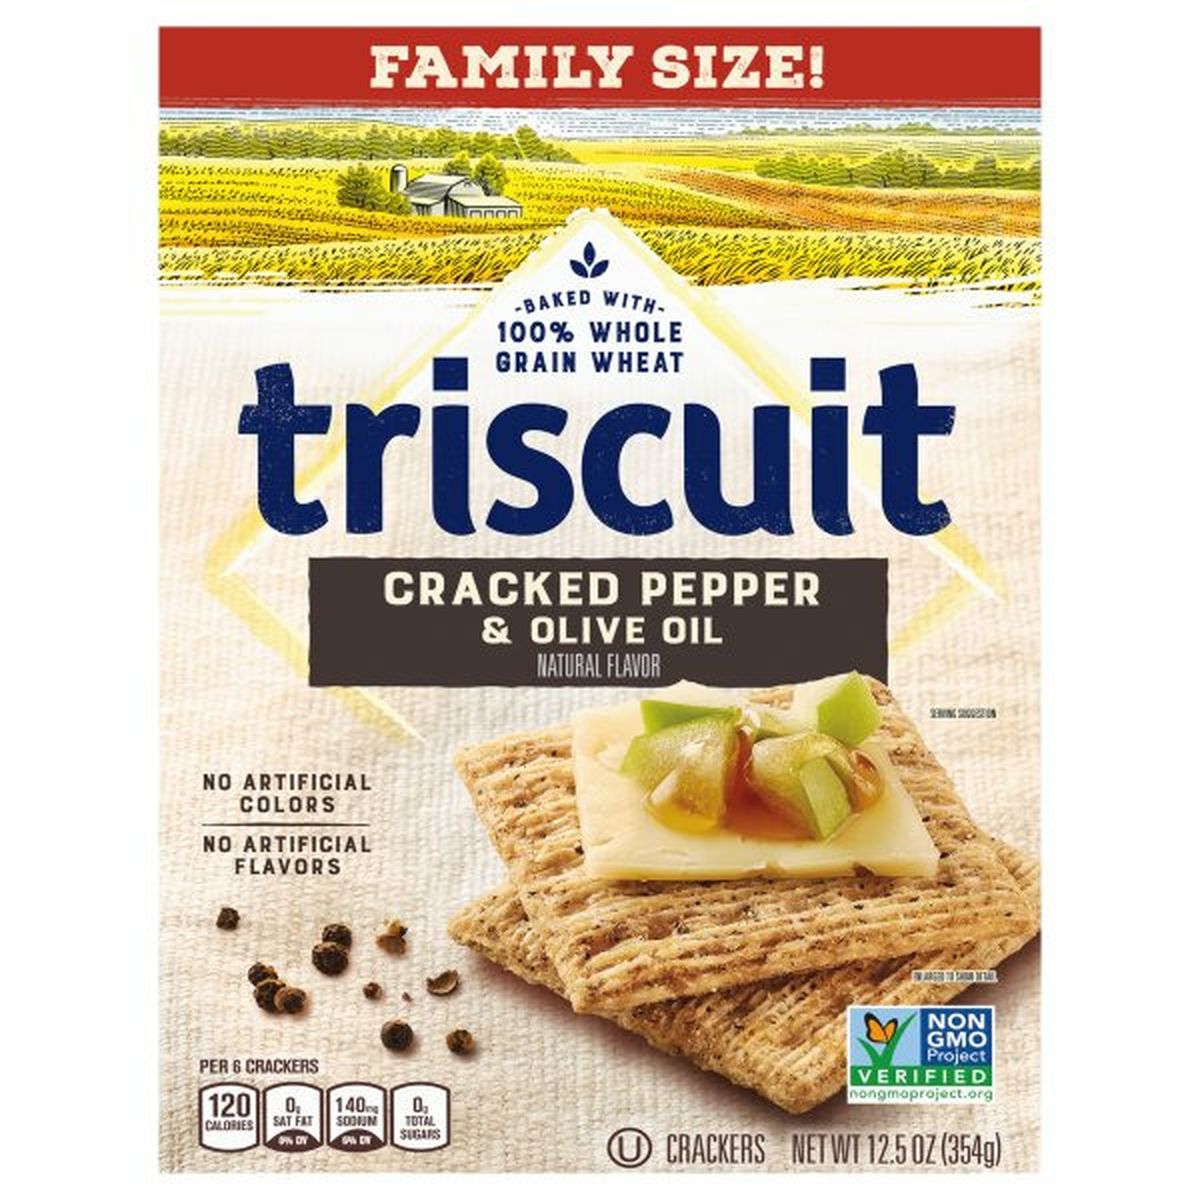 Calories in Triscuit Crackers, Cracked Pepper & Olive Oil, Family Size